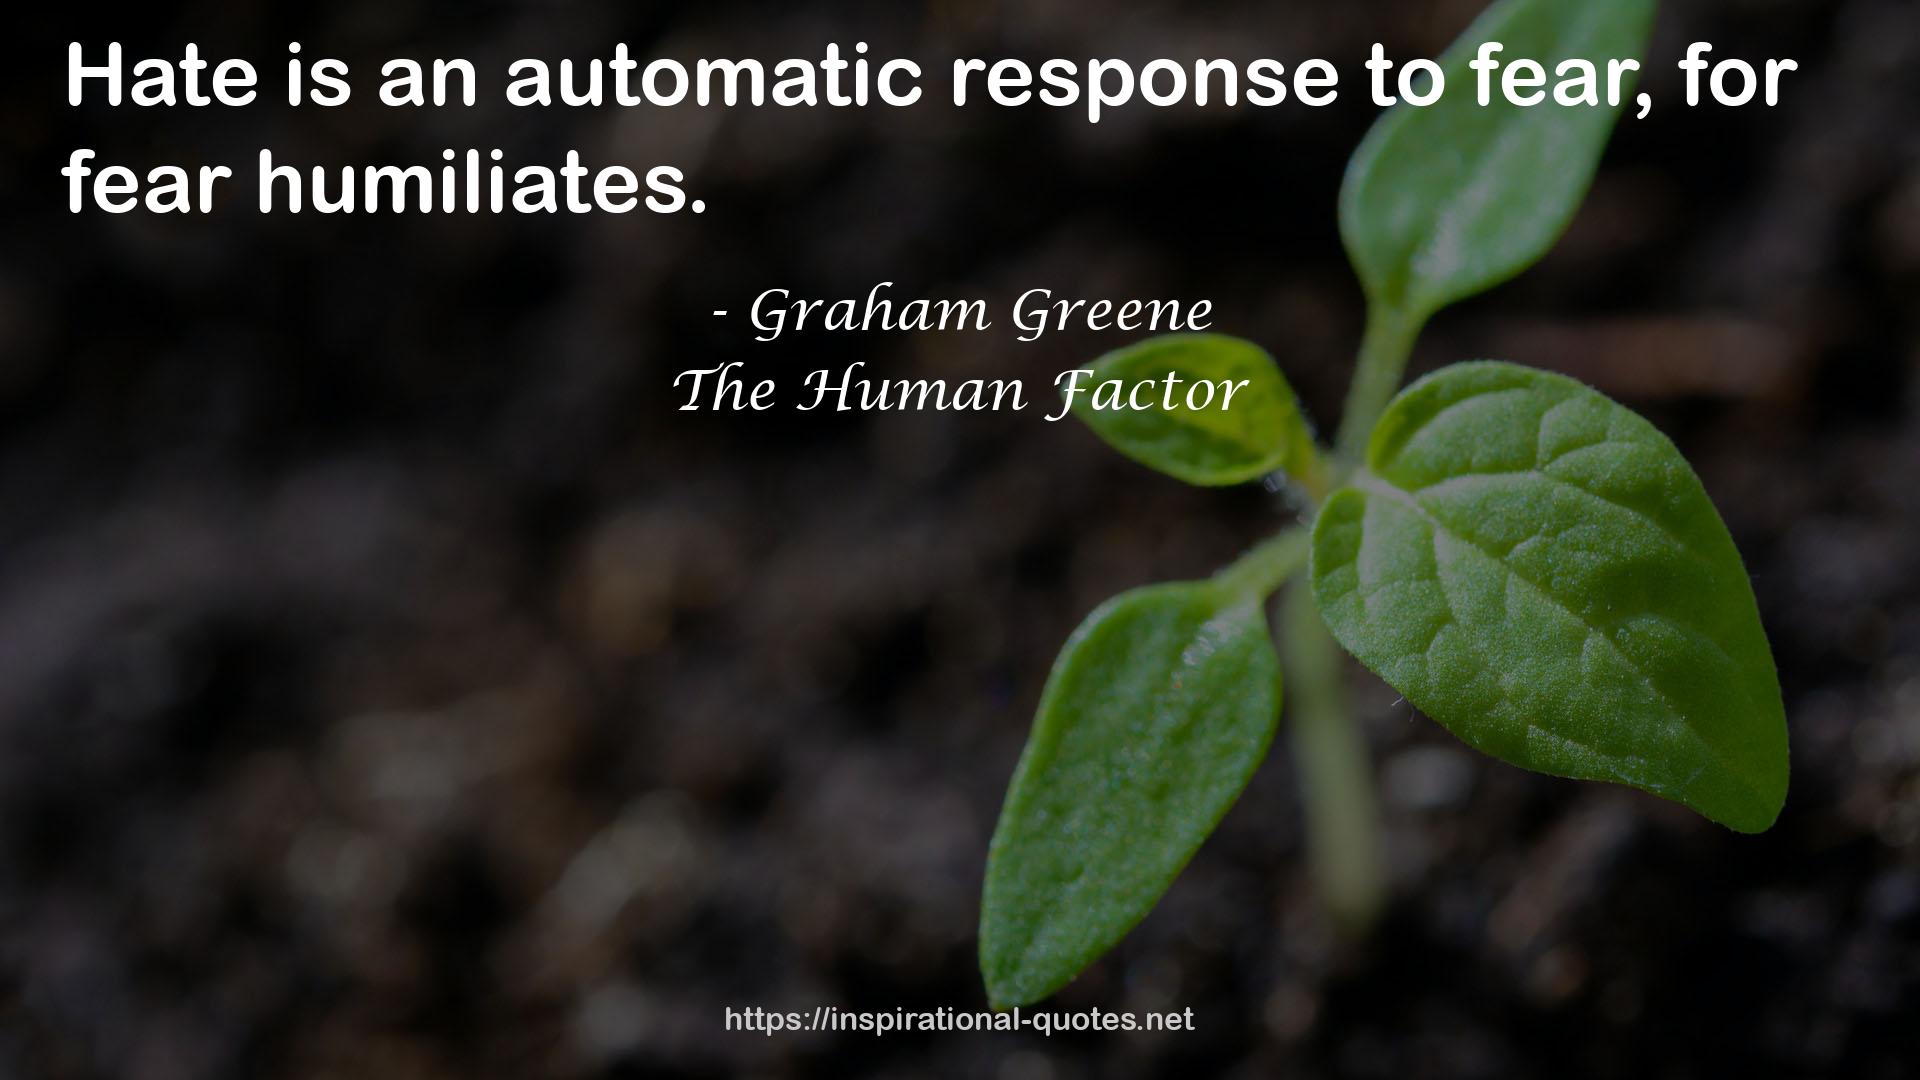 The Human Factor QUOTES